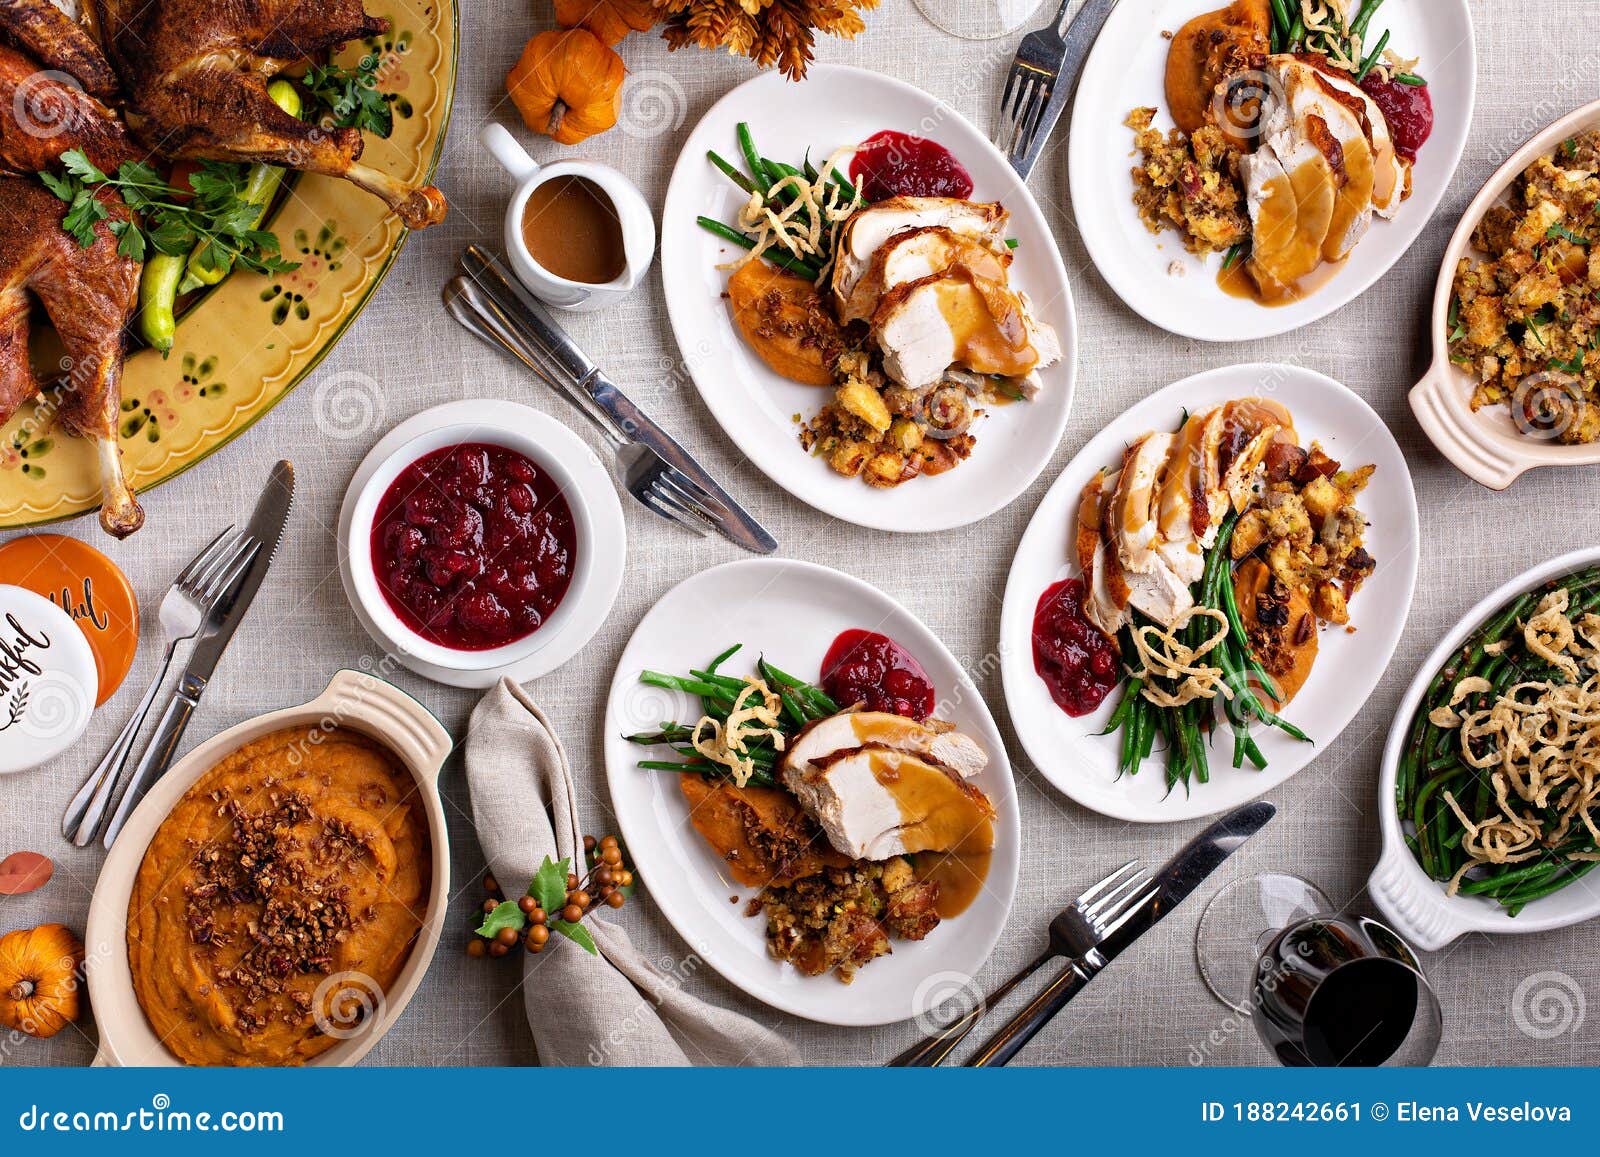 Festive Thankgiving Dinner Table with Plates of Food Stock Image ...